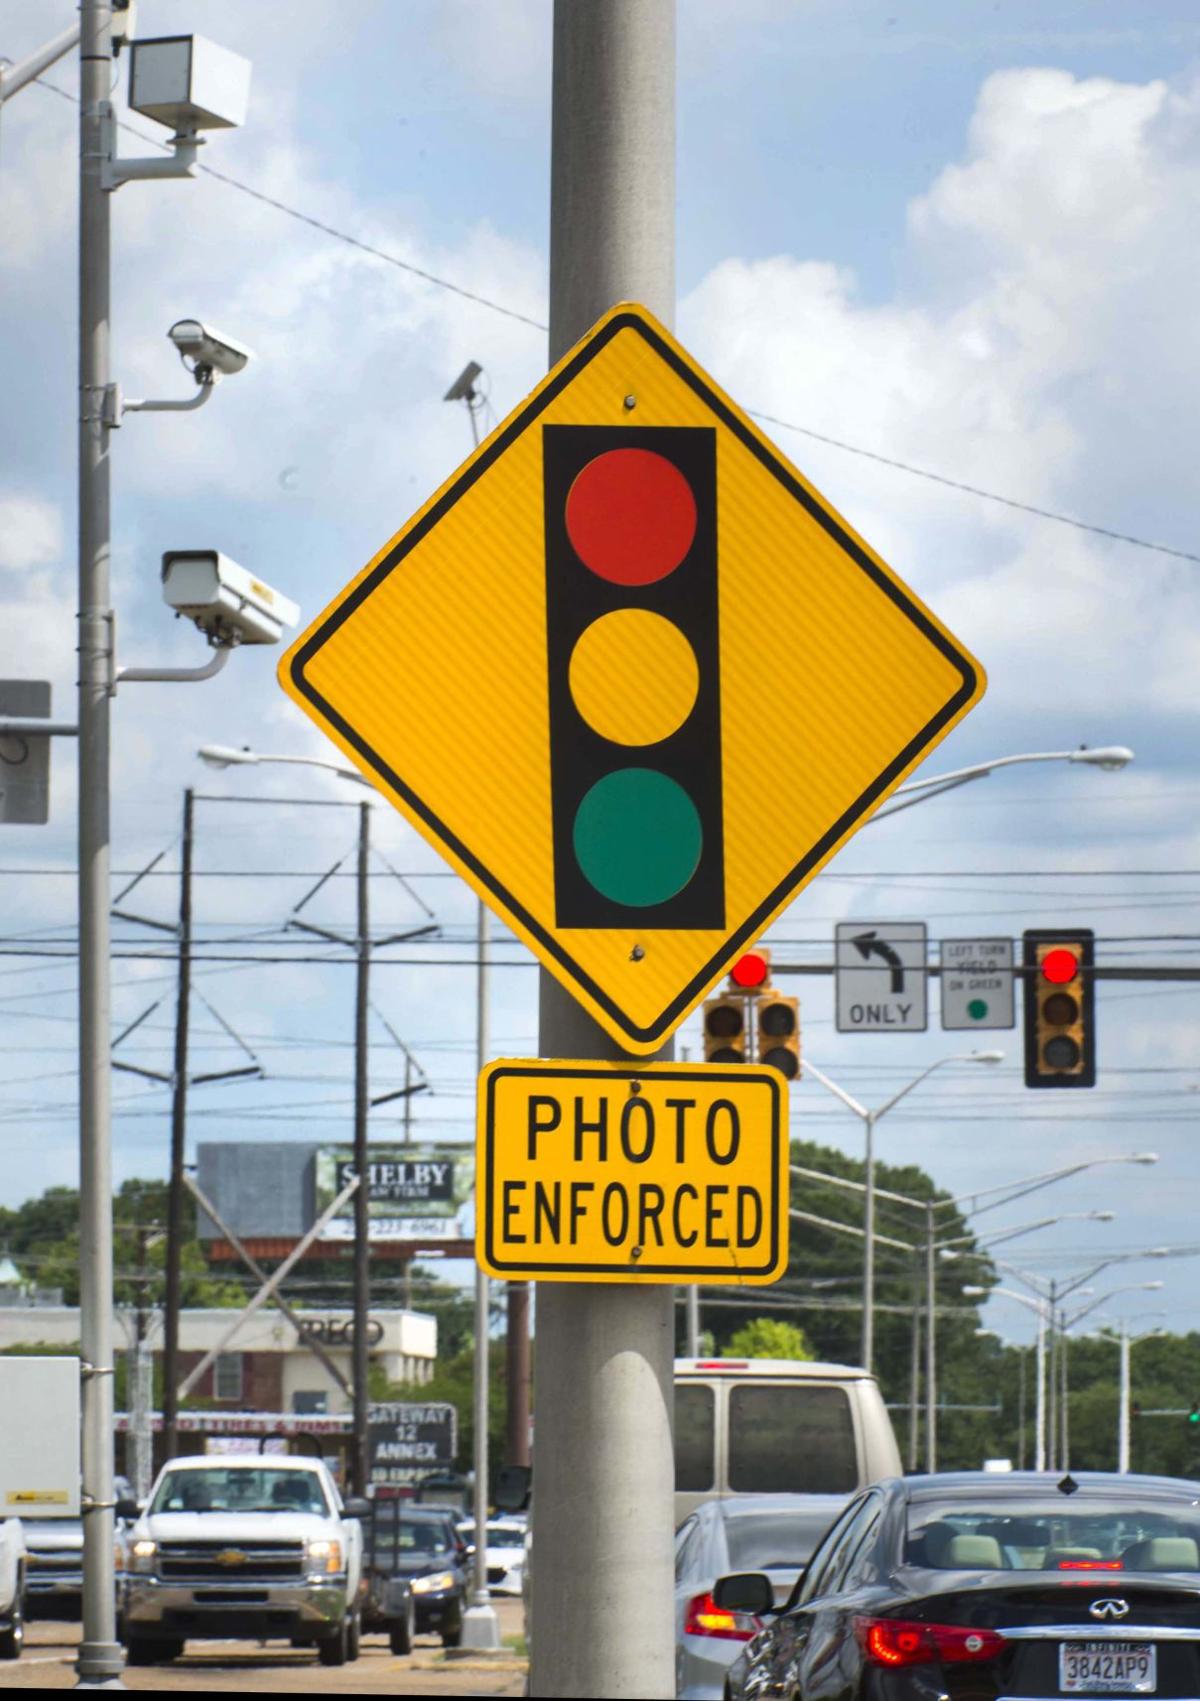 Extension To Baton Rouge S Red Light Camera Contract Sought By Mayor Councilman Skeptical News Theadvocate Com